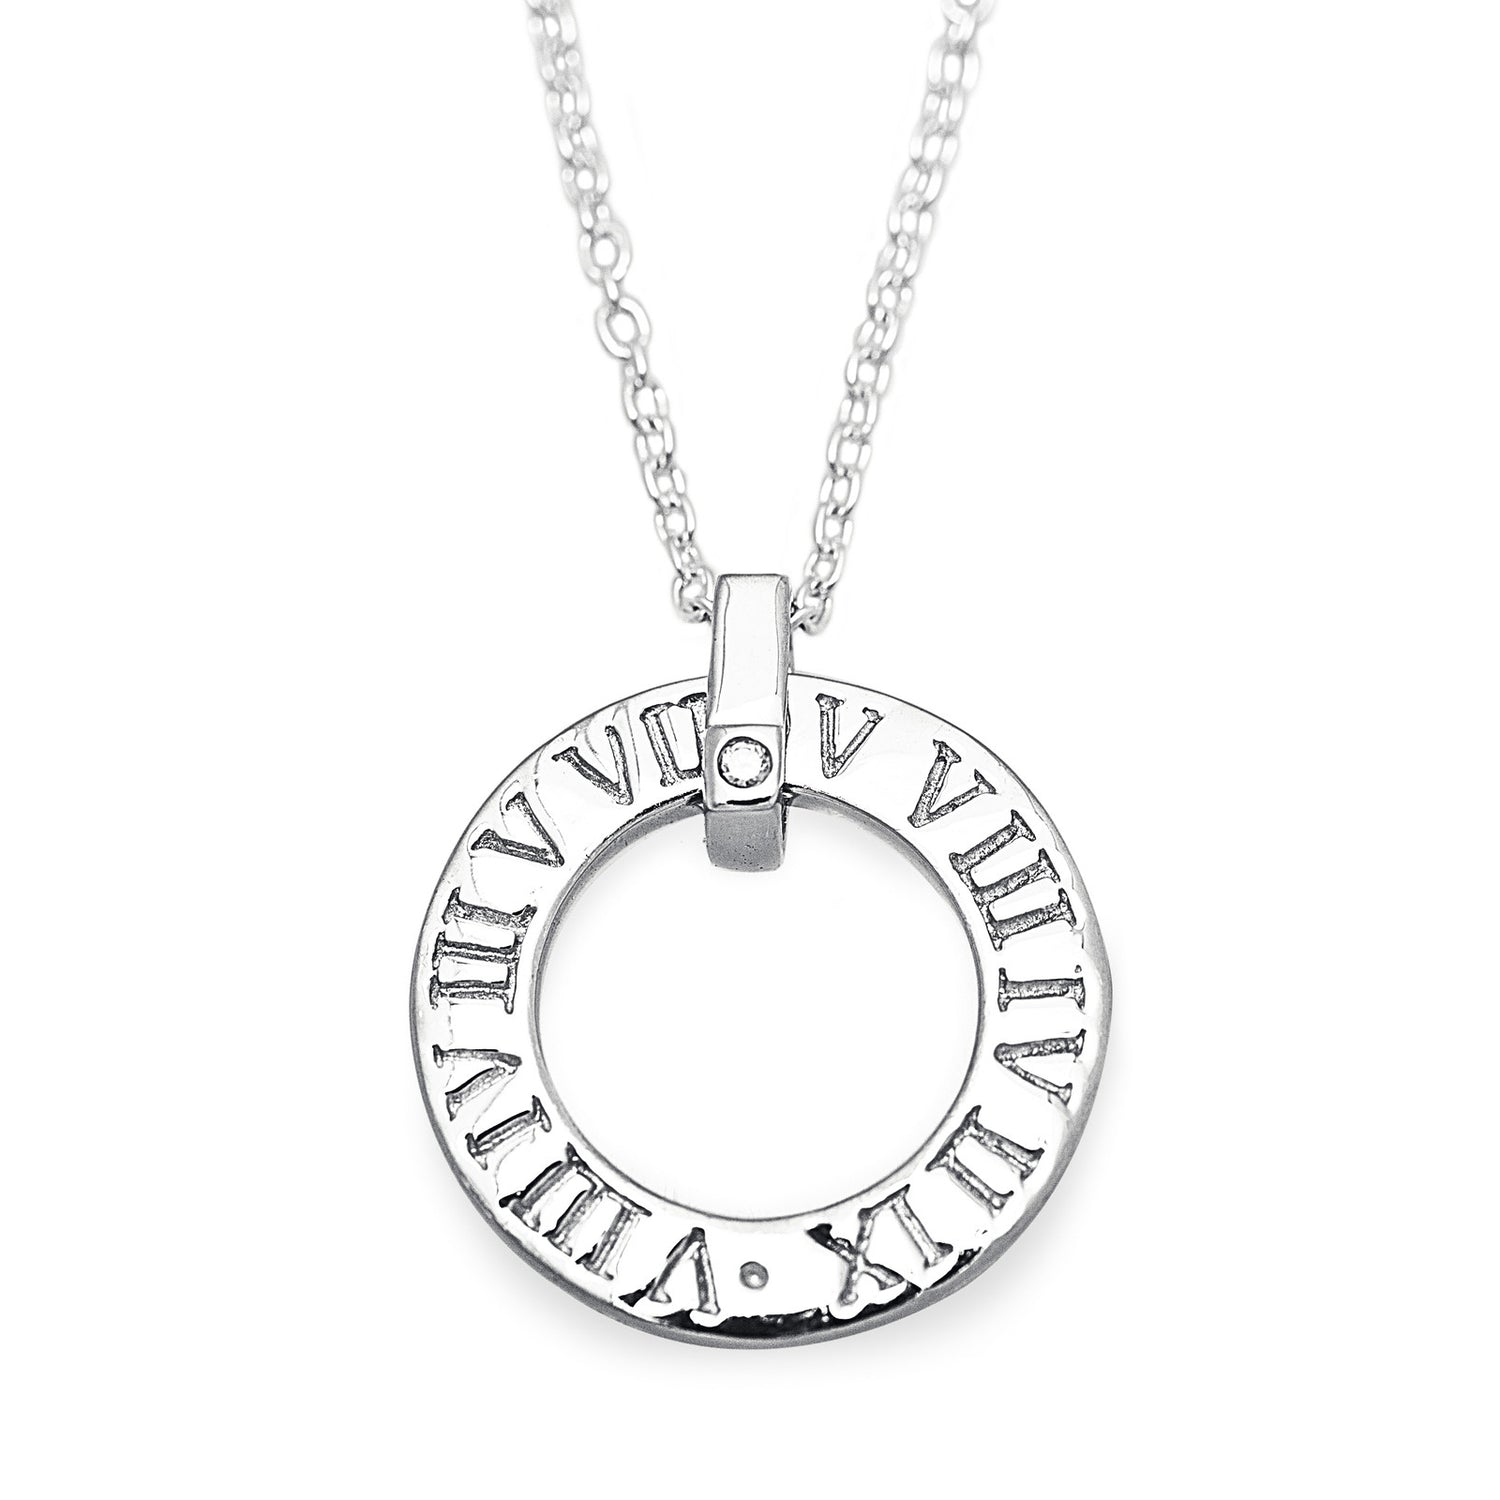 'O' shape Roman Bliss Necklace in 925 sterling silver and features our signature Roman numerals and a single cubic zirconia. Worldwide shipping. Affordable luxury jewellery by Bellagio & Co. 